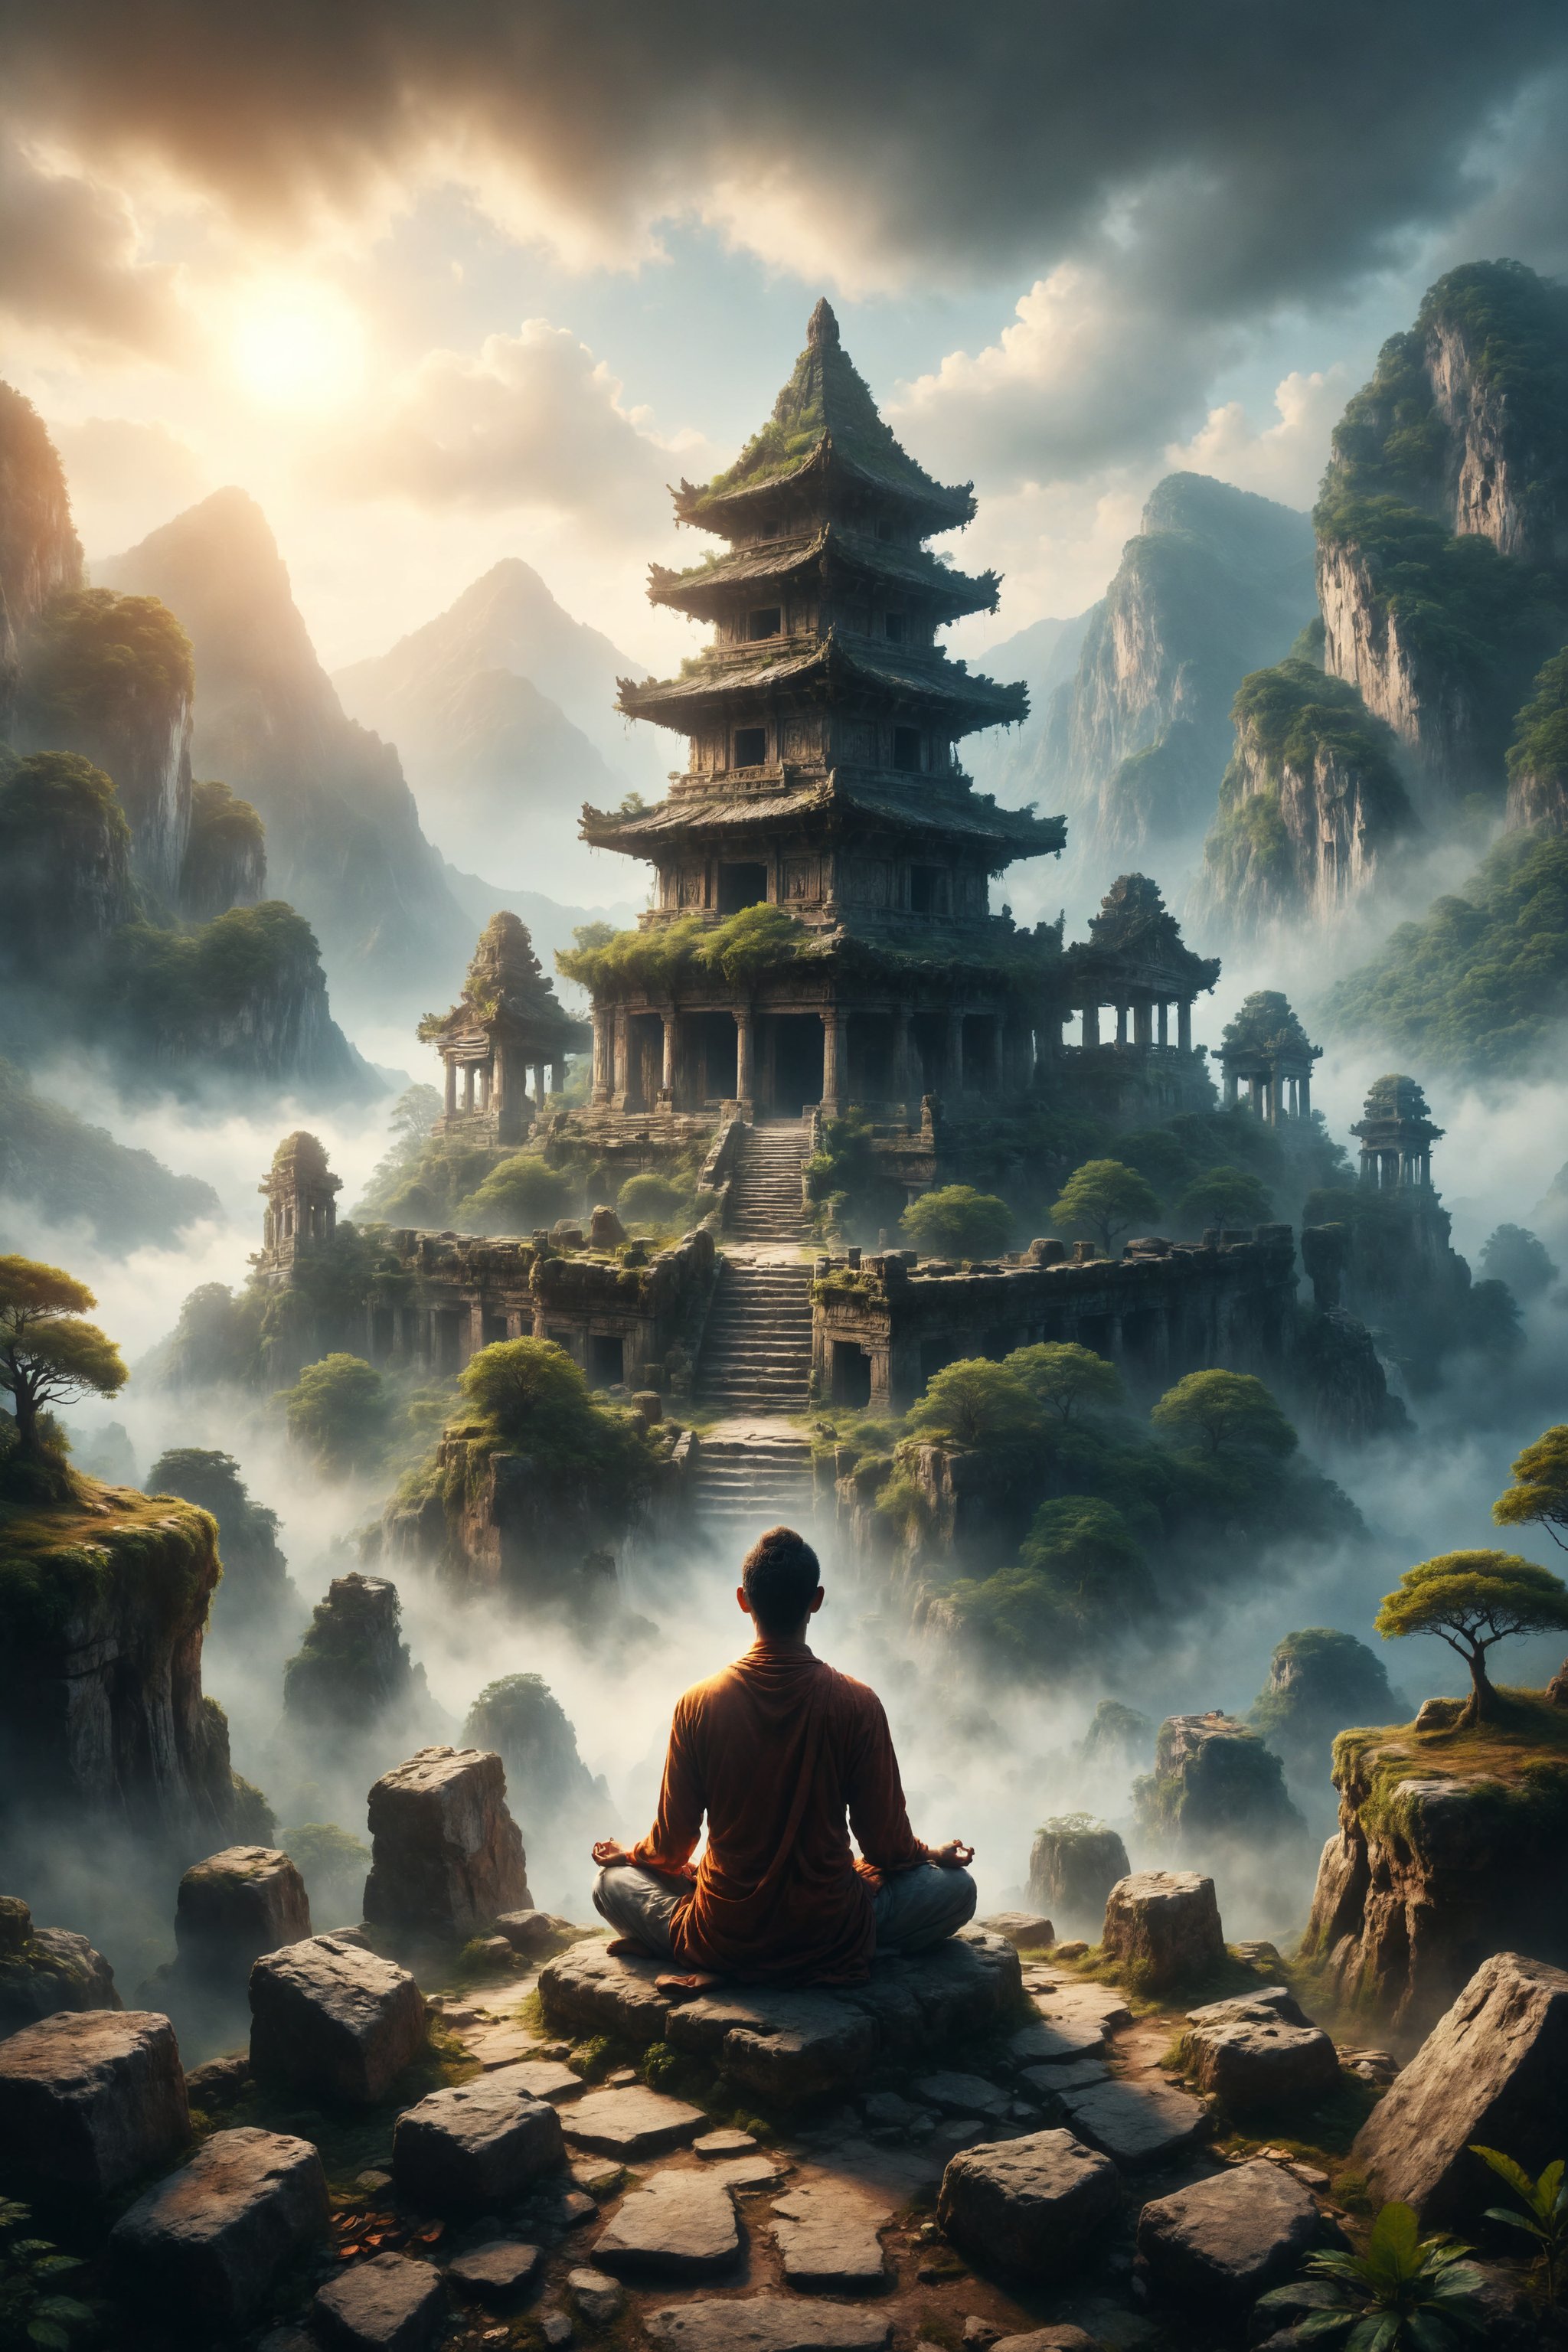 Create an illustration of a person meditating in an ancient temple on top of a mountain.